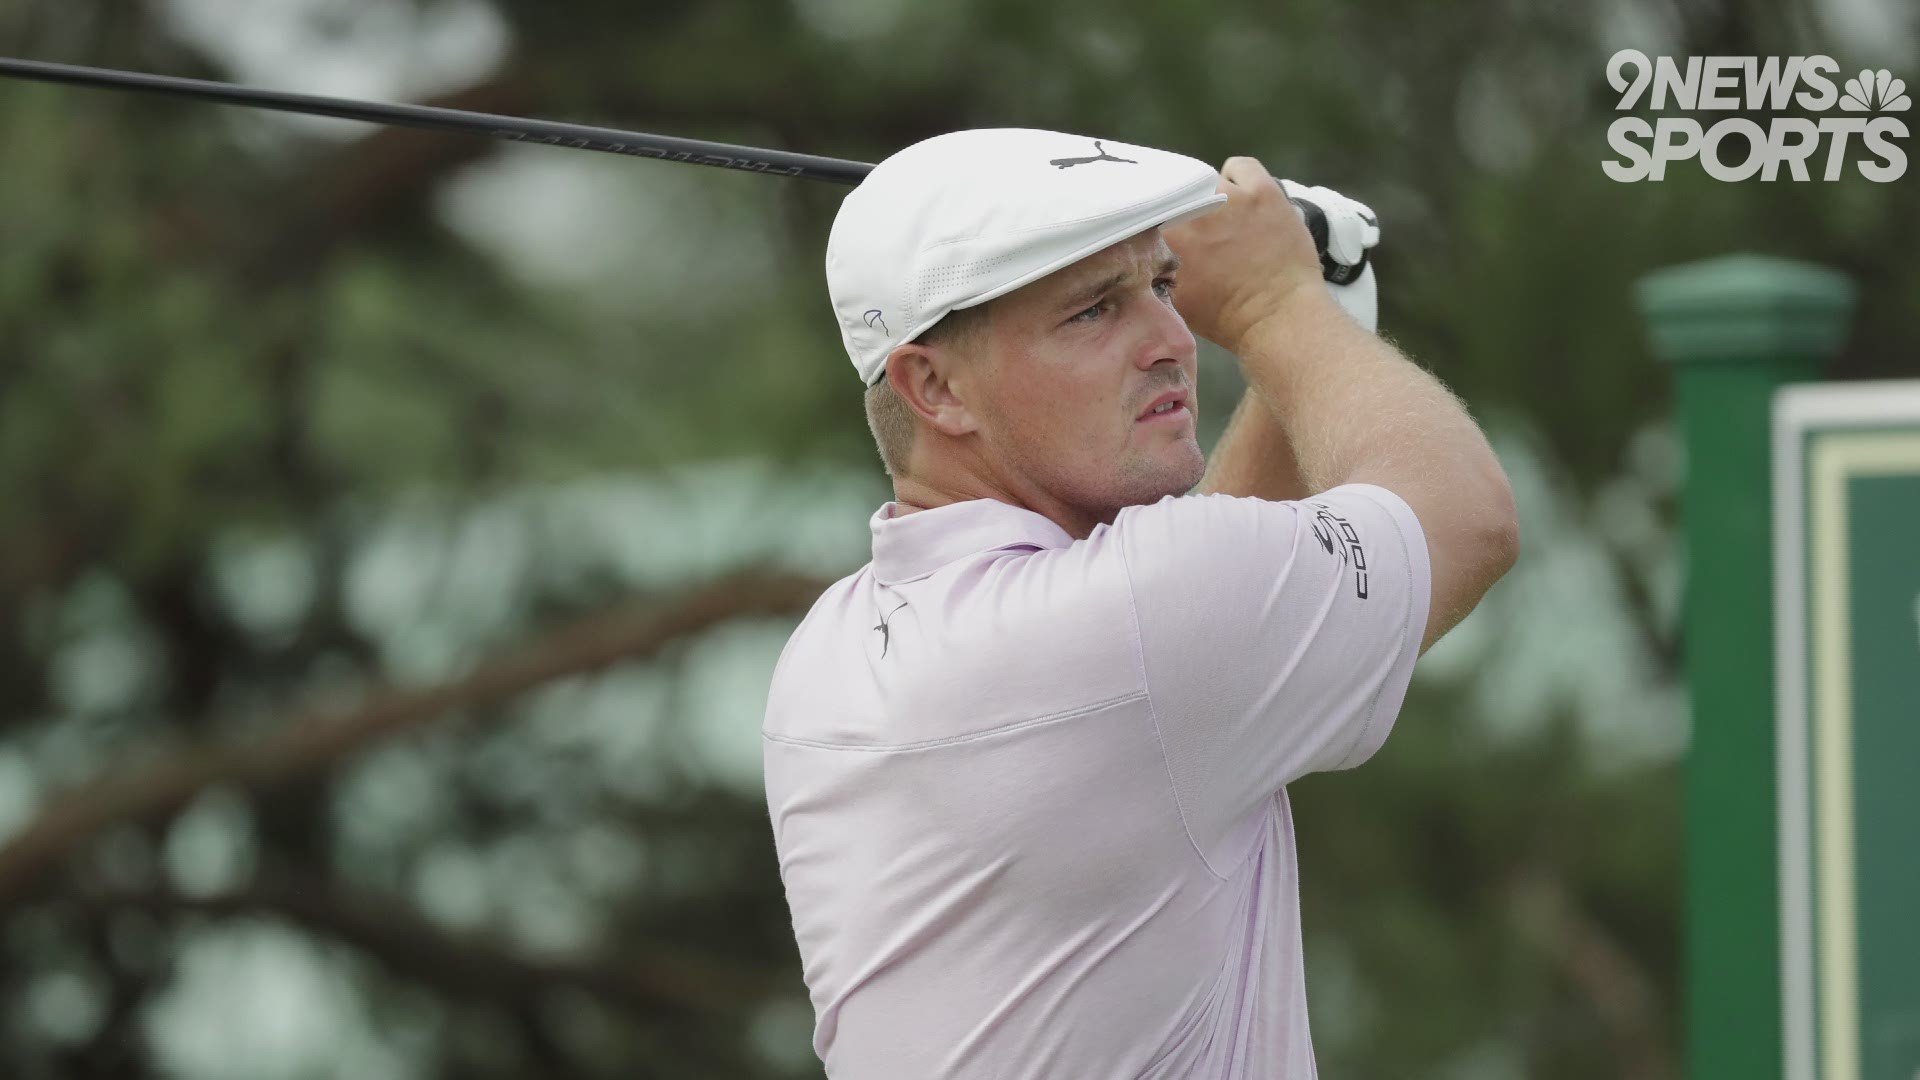 DeChambeau's metamorphosis began at Muscle Activation Techniques in Englewood. Greg Roskopf’s training program might be the wave of the future for golfers.